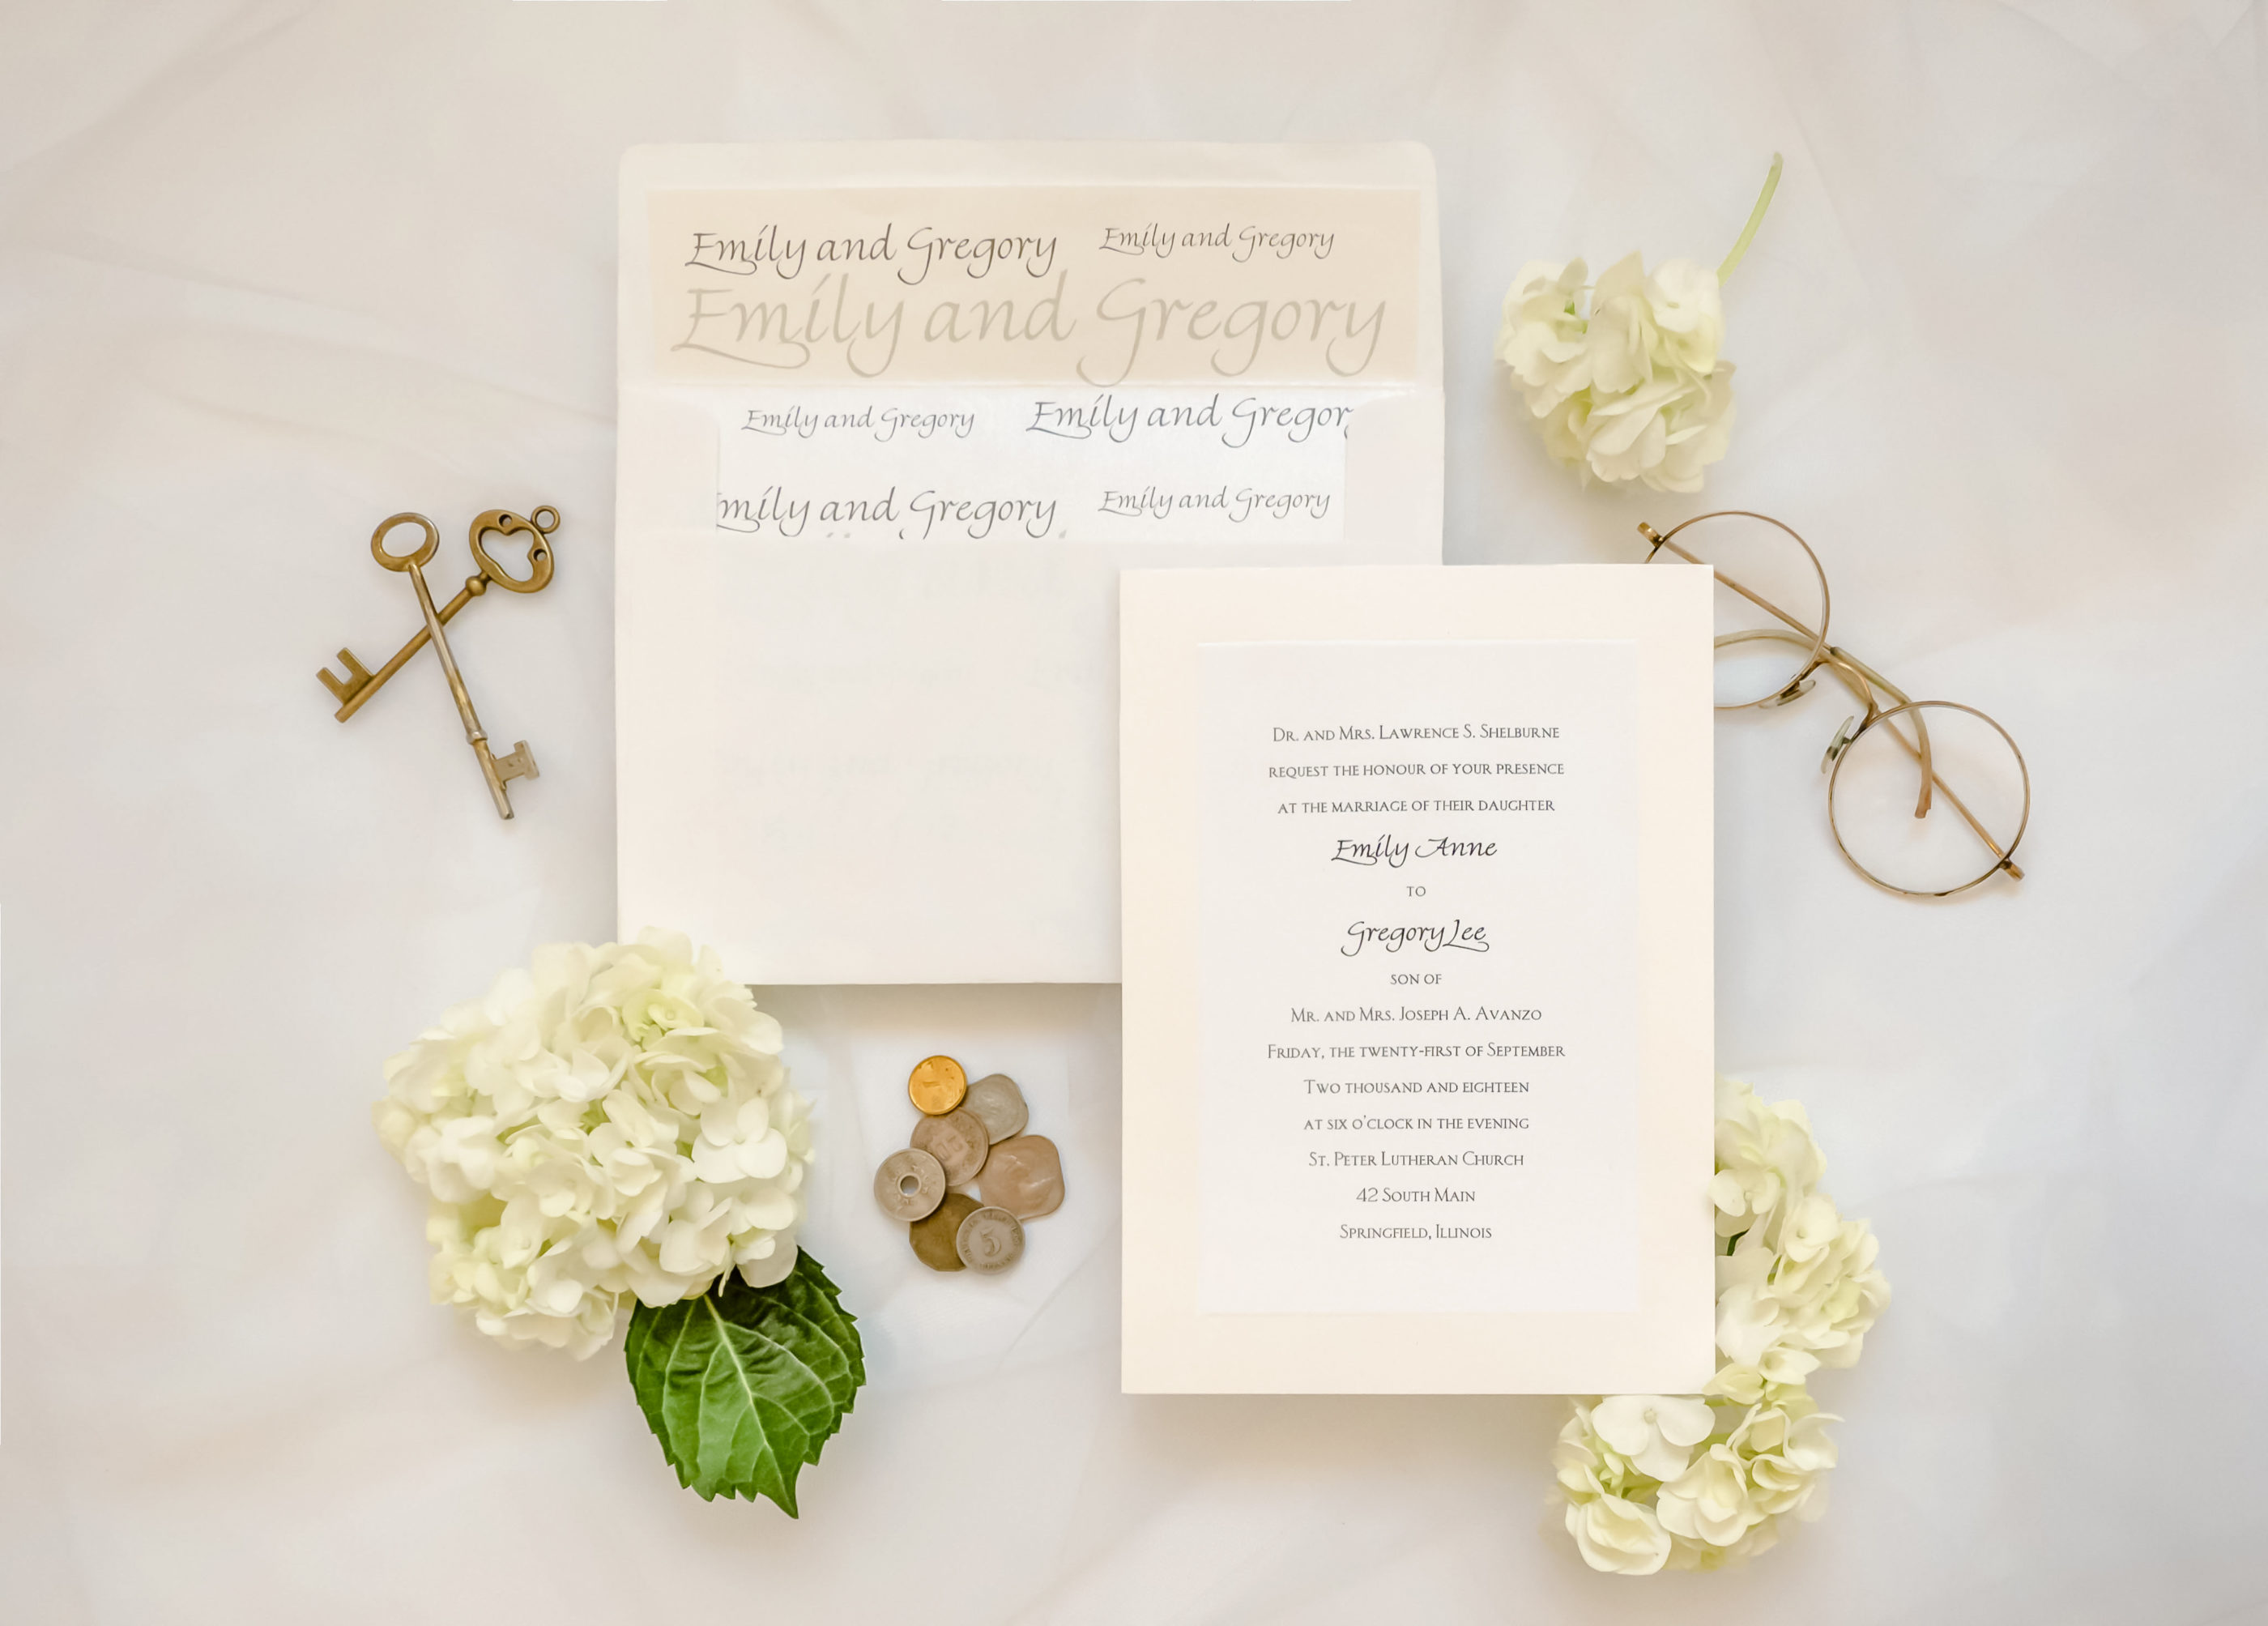 cream colored invitation and envelope with bride and groom's names on inside of envelope